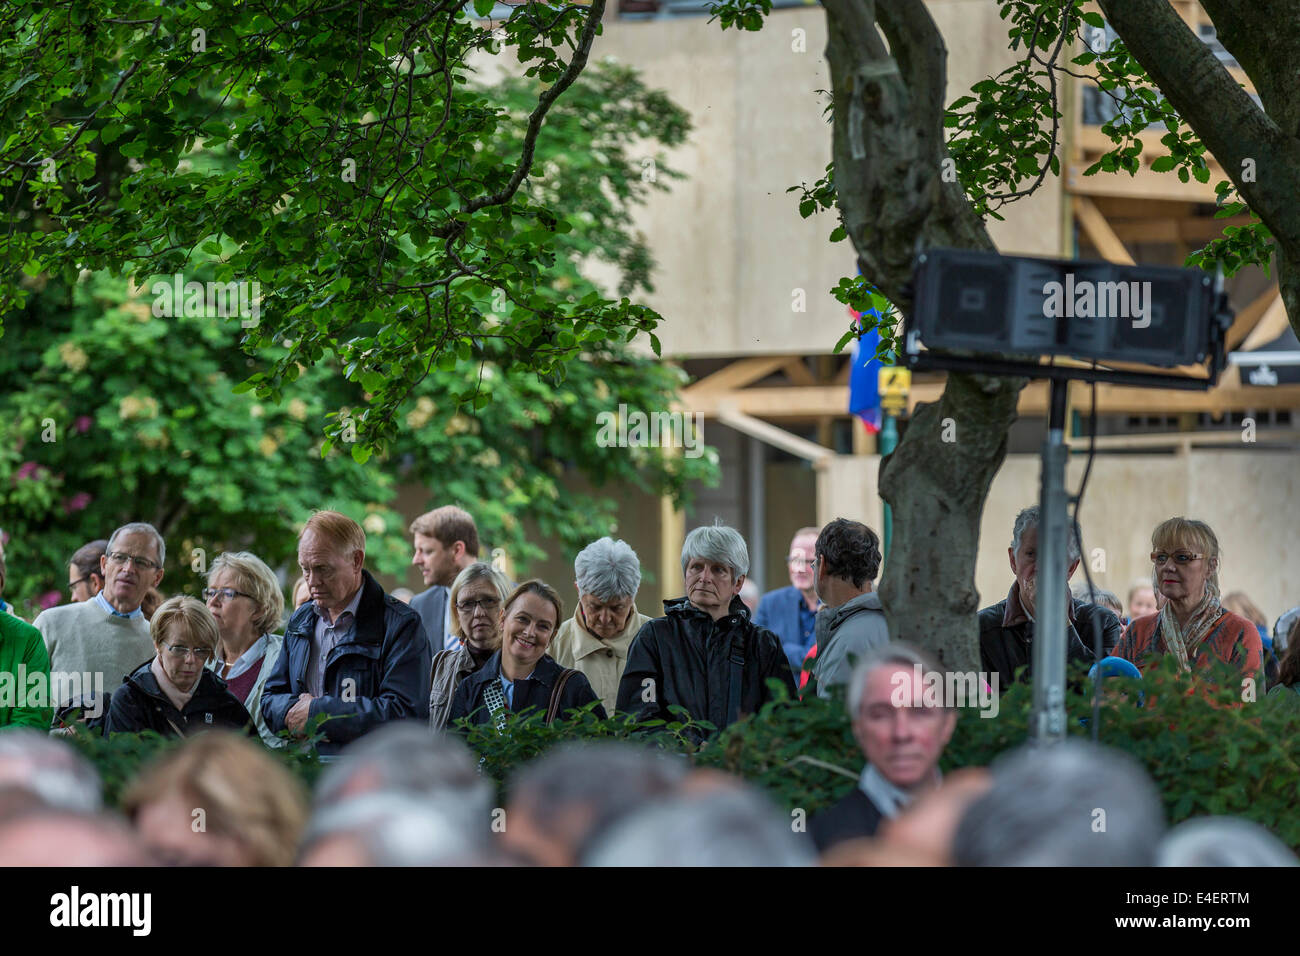 People watching celebrations. June 17th-Iceland's Independence Day, Reykjavik, Iceland Stock Photo